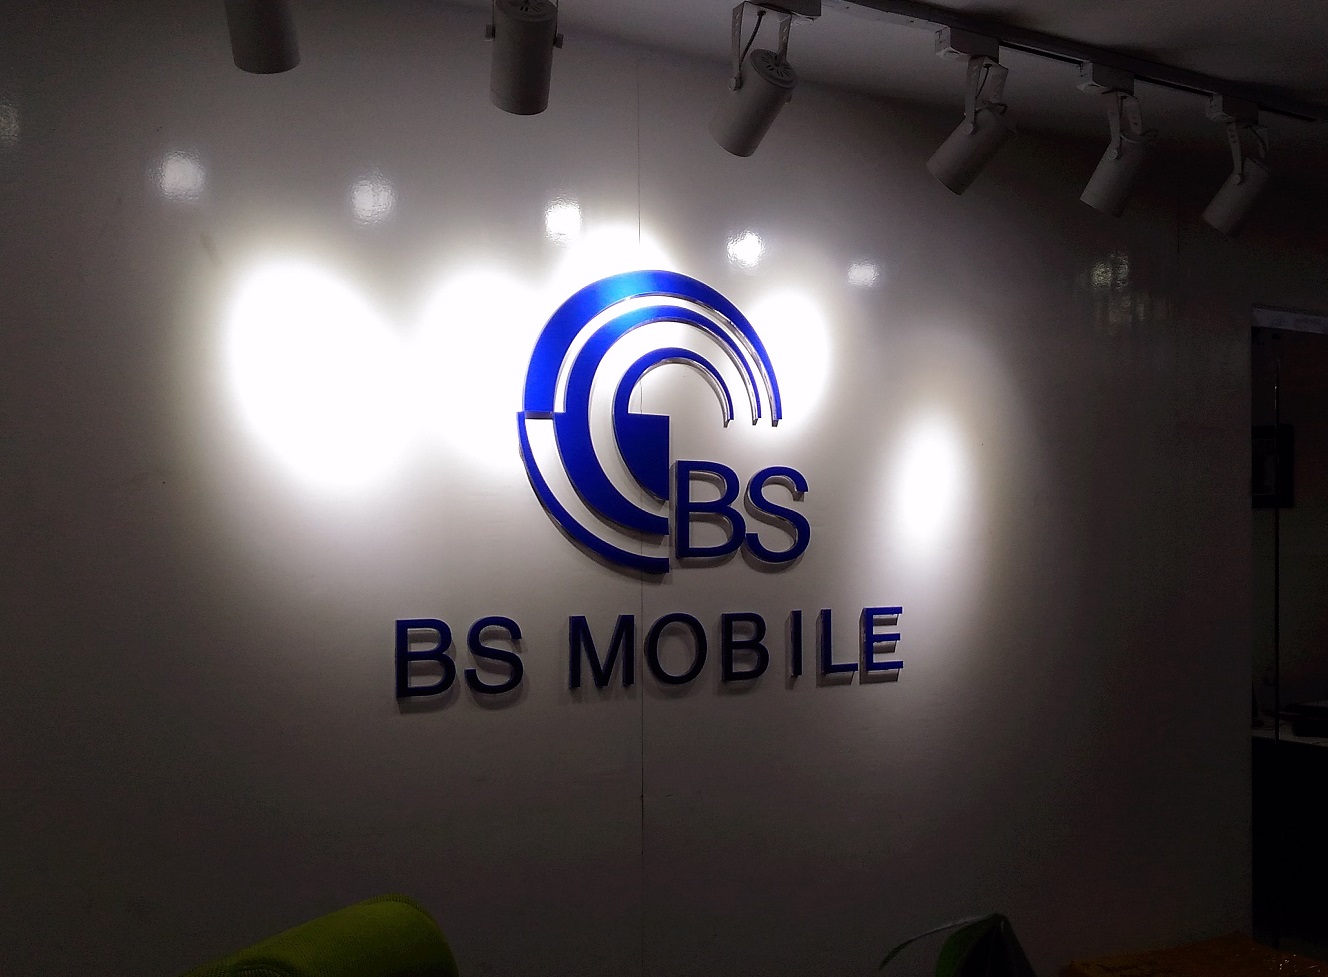 BS Mobile leaks own Php 3k phone with 4G LTE, 5-inch screen, and Android Lollipop